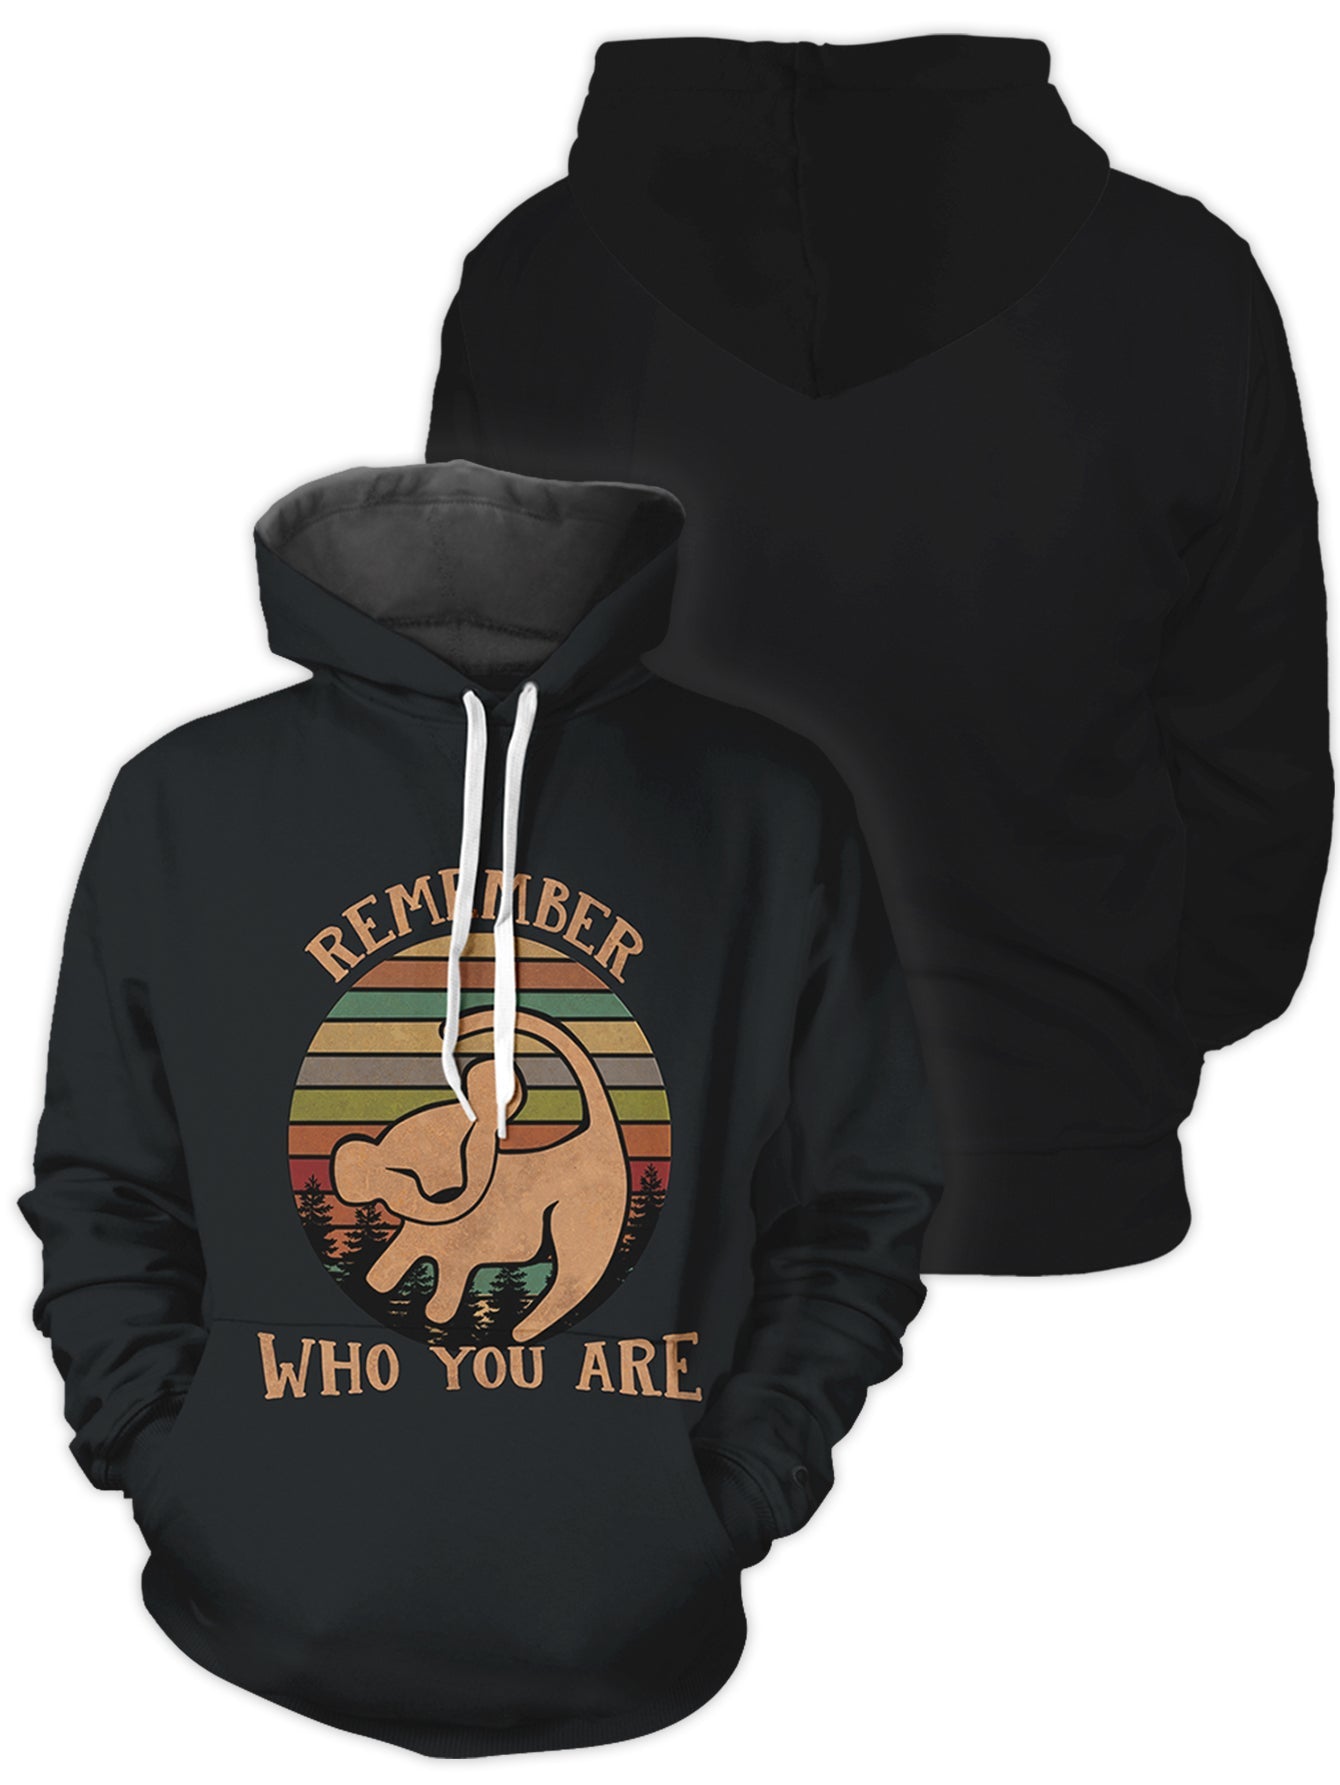 Fandomaniax - Remember Who You Are Unisex Pullover Hoodie